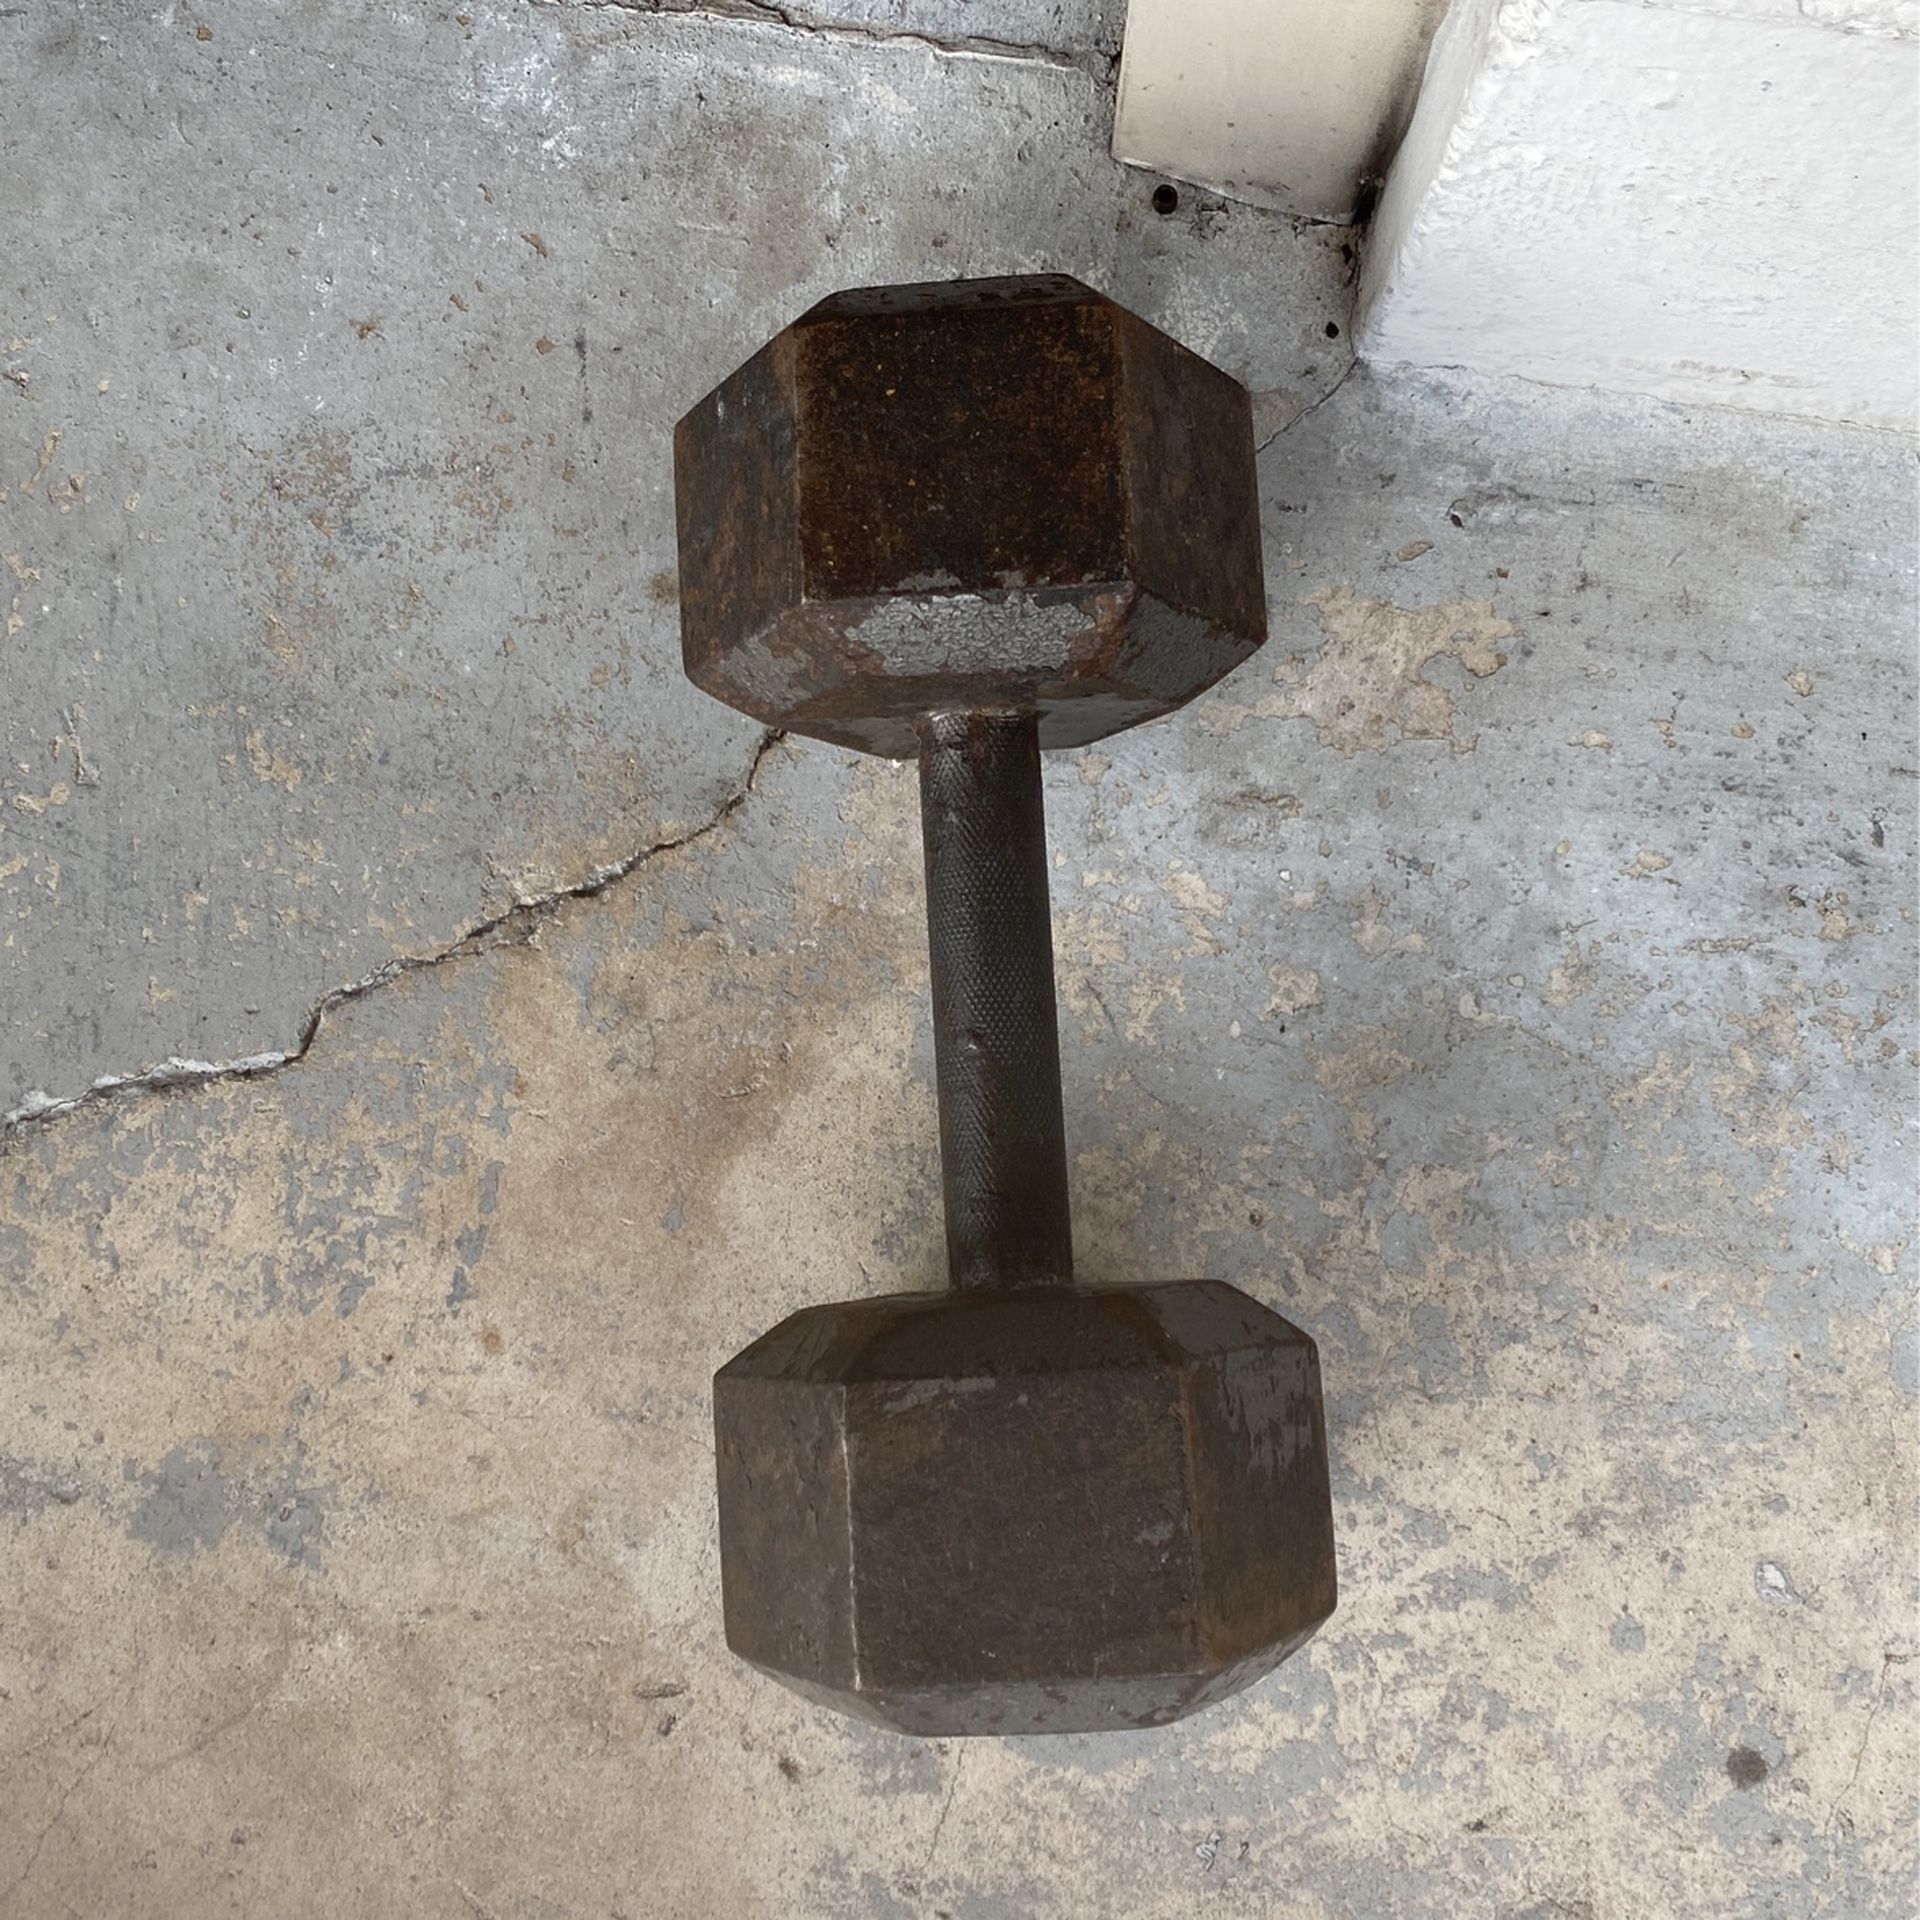 Dumbbell 30lbs  Weight 